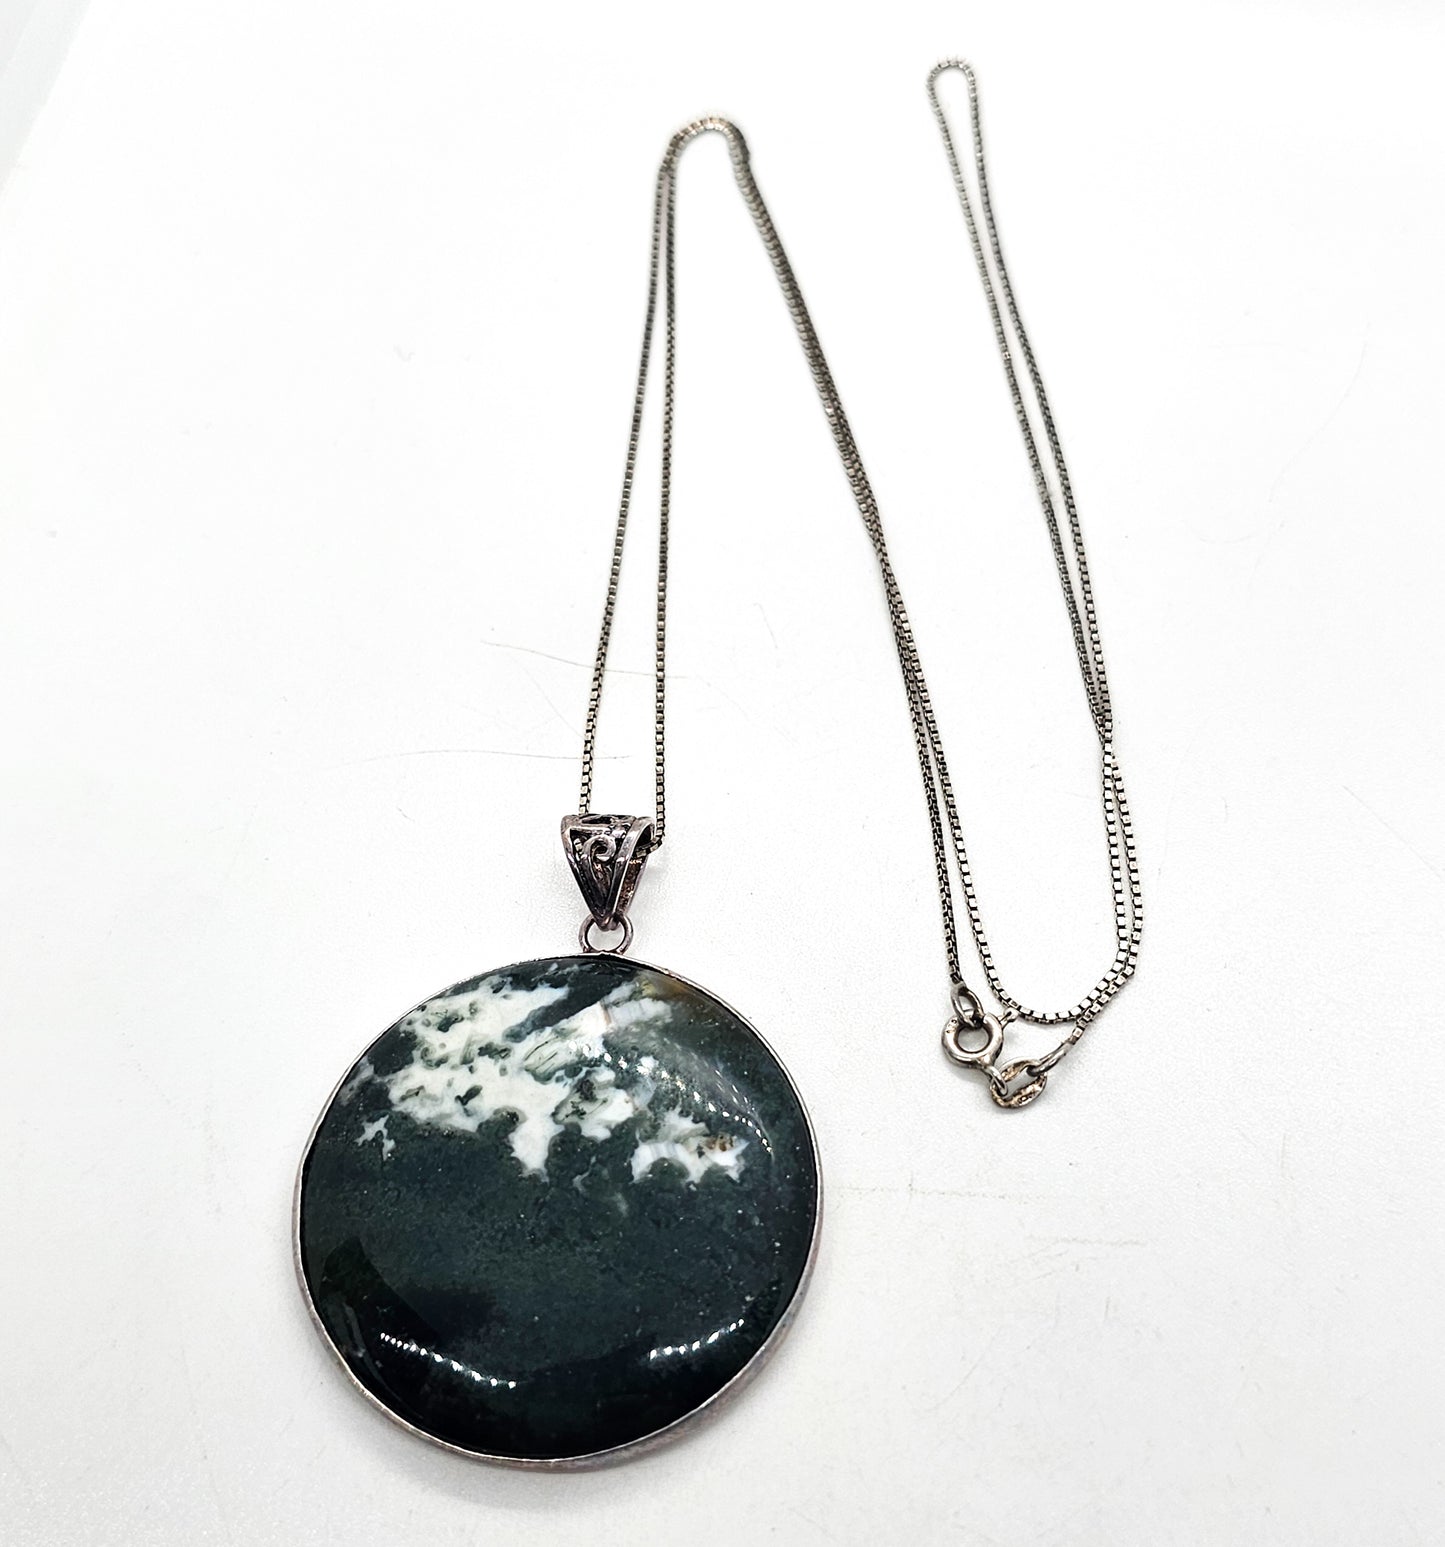 Moss Tree Agate large green gemstone sterling silver pendant necklace